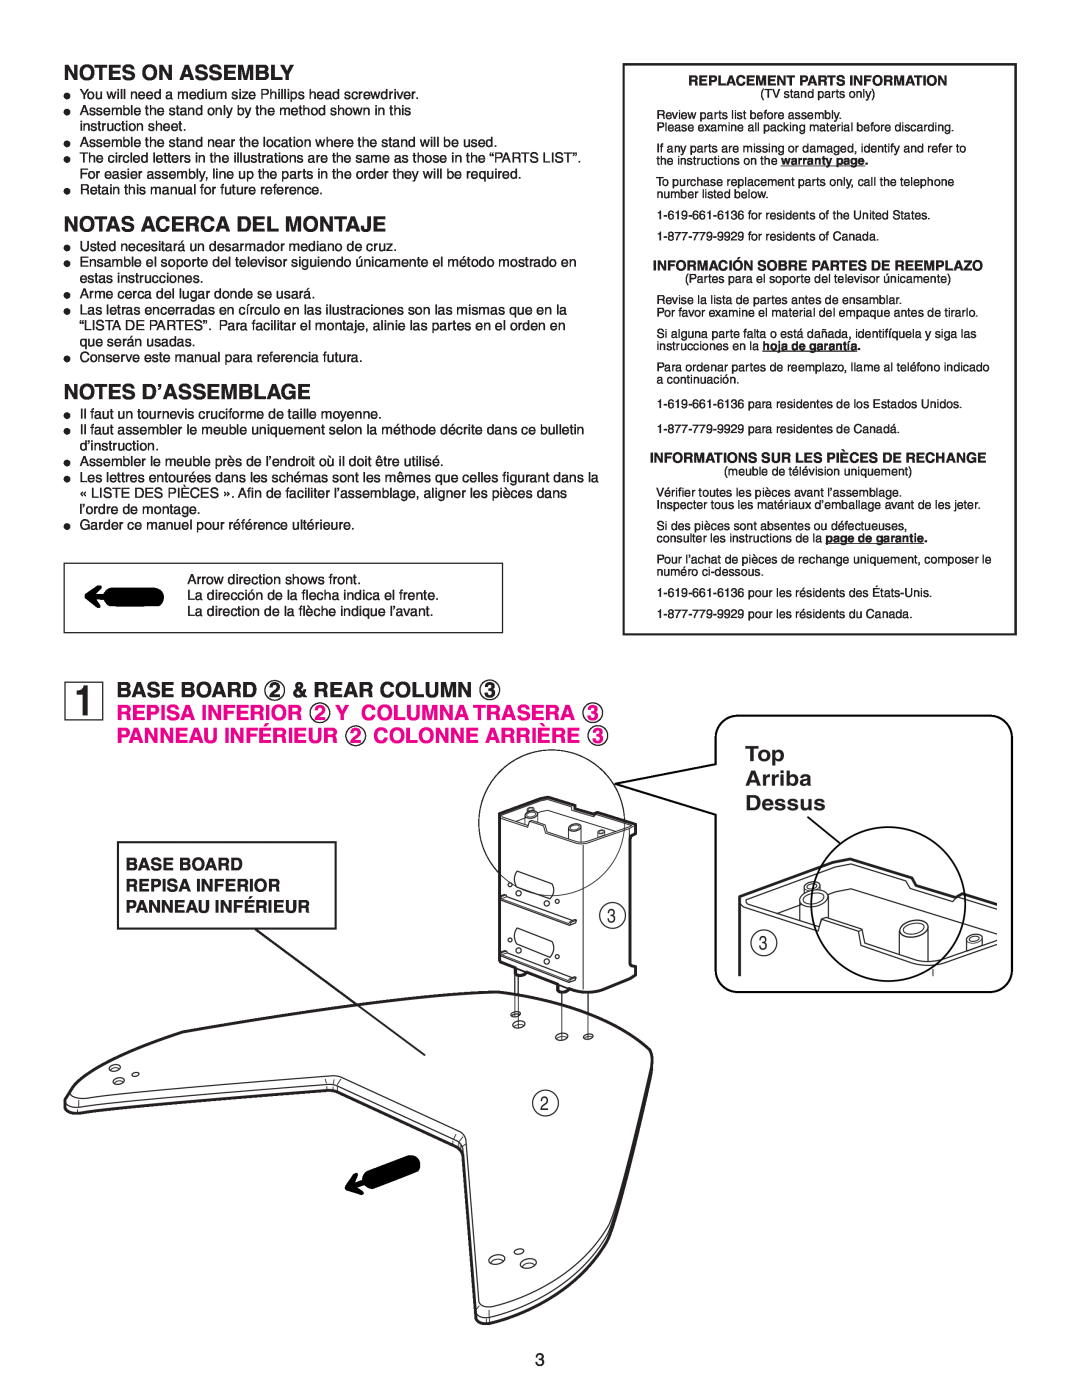 Sony SU-32HX1 manual Notes On Assembly, Notas Acerca Del Montaje, Notes D’Assemblage, 1BASE BOARD 2 & REAR COLUMN 